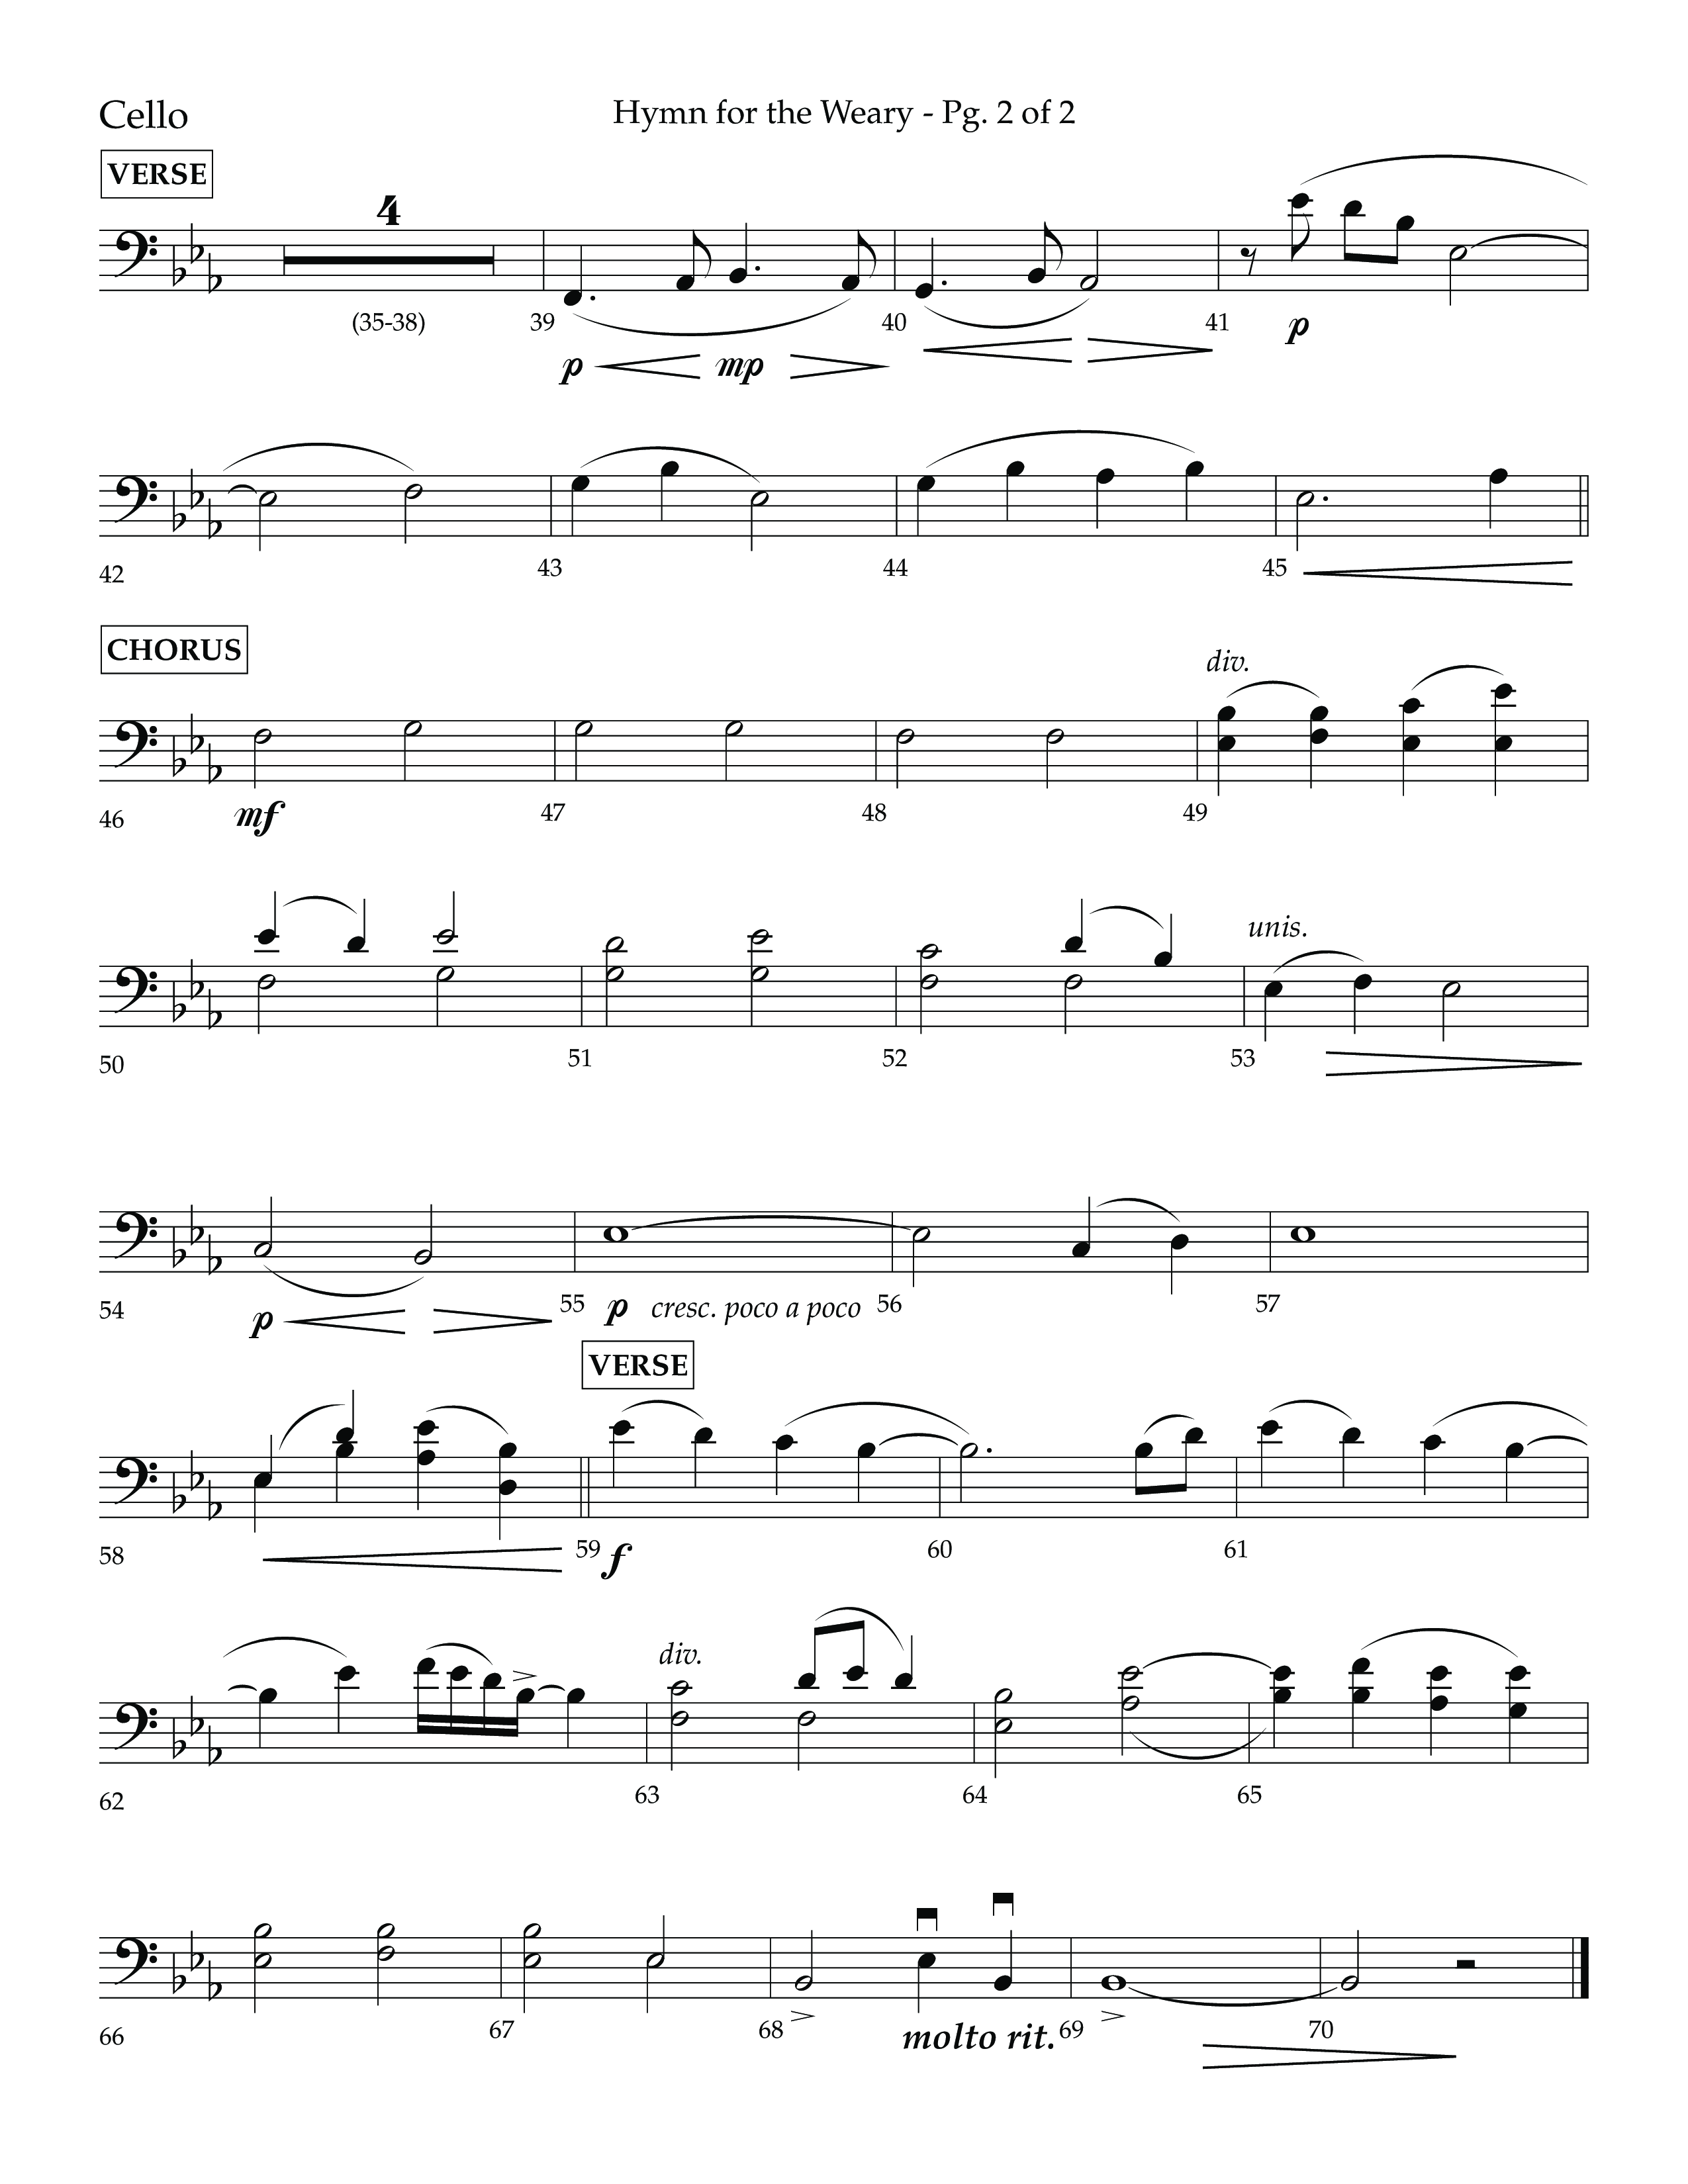 Hymn For The Weary (Choral Anthem SATB) Cello (Lifeway Choral / Arr. Cody McVey)